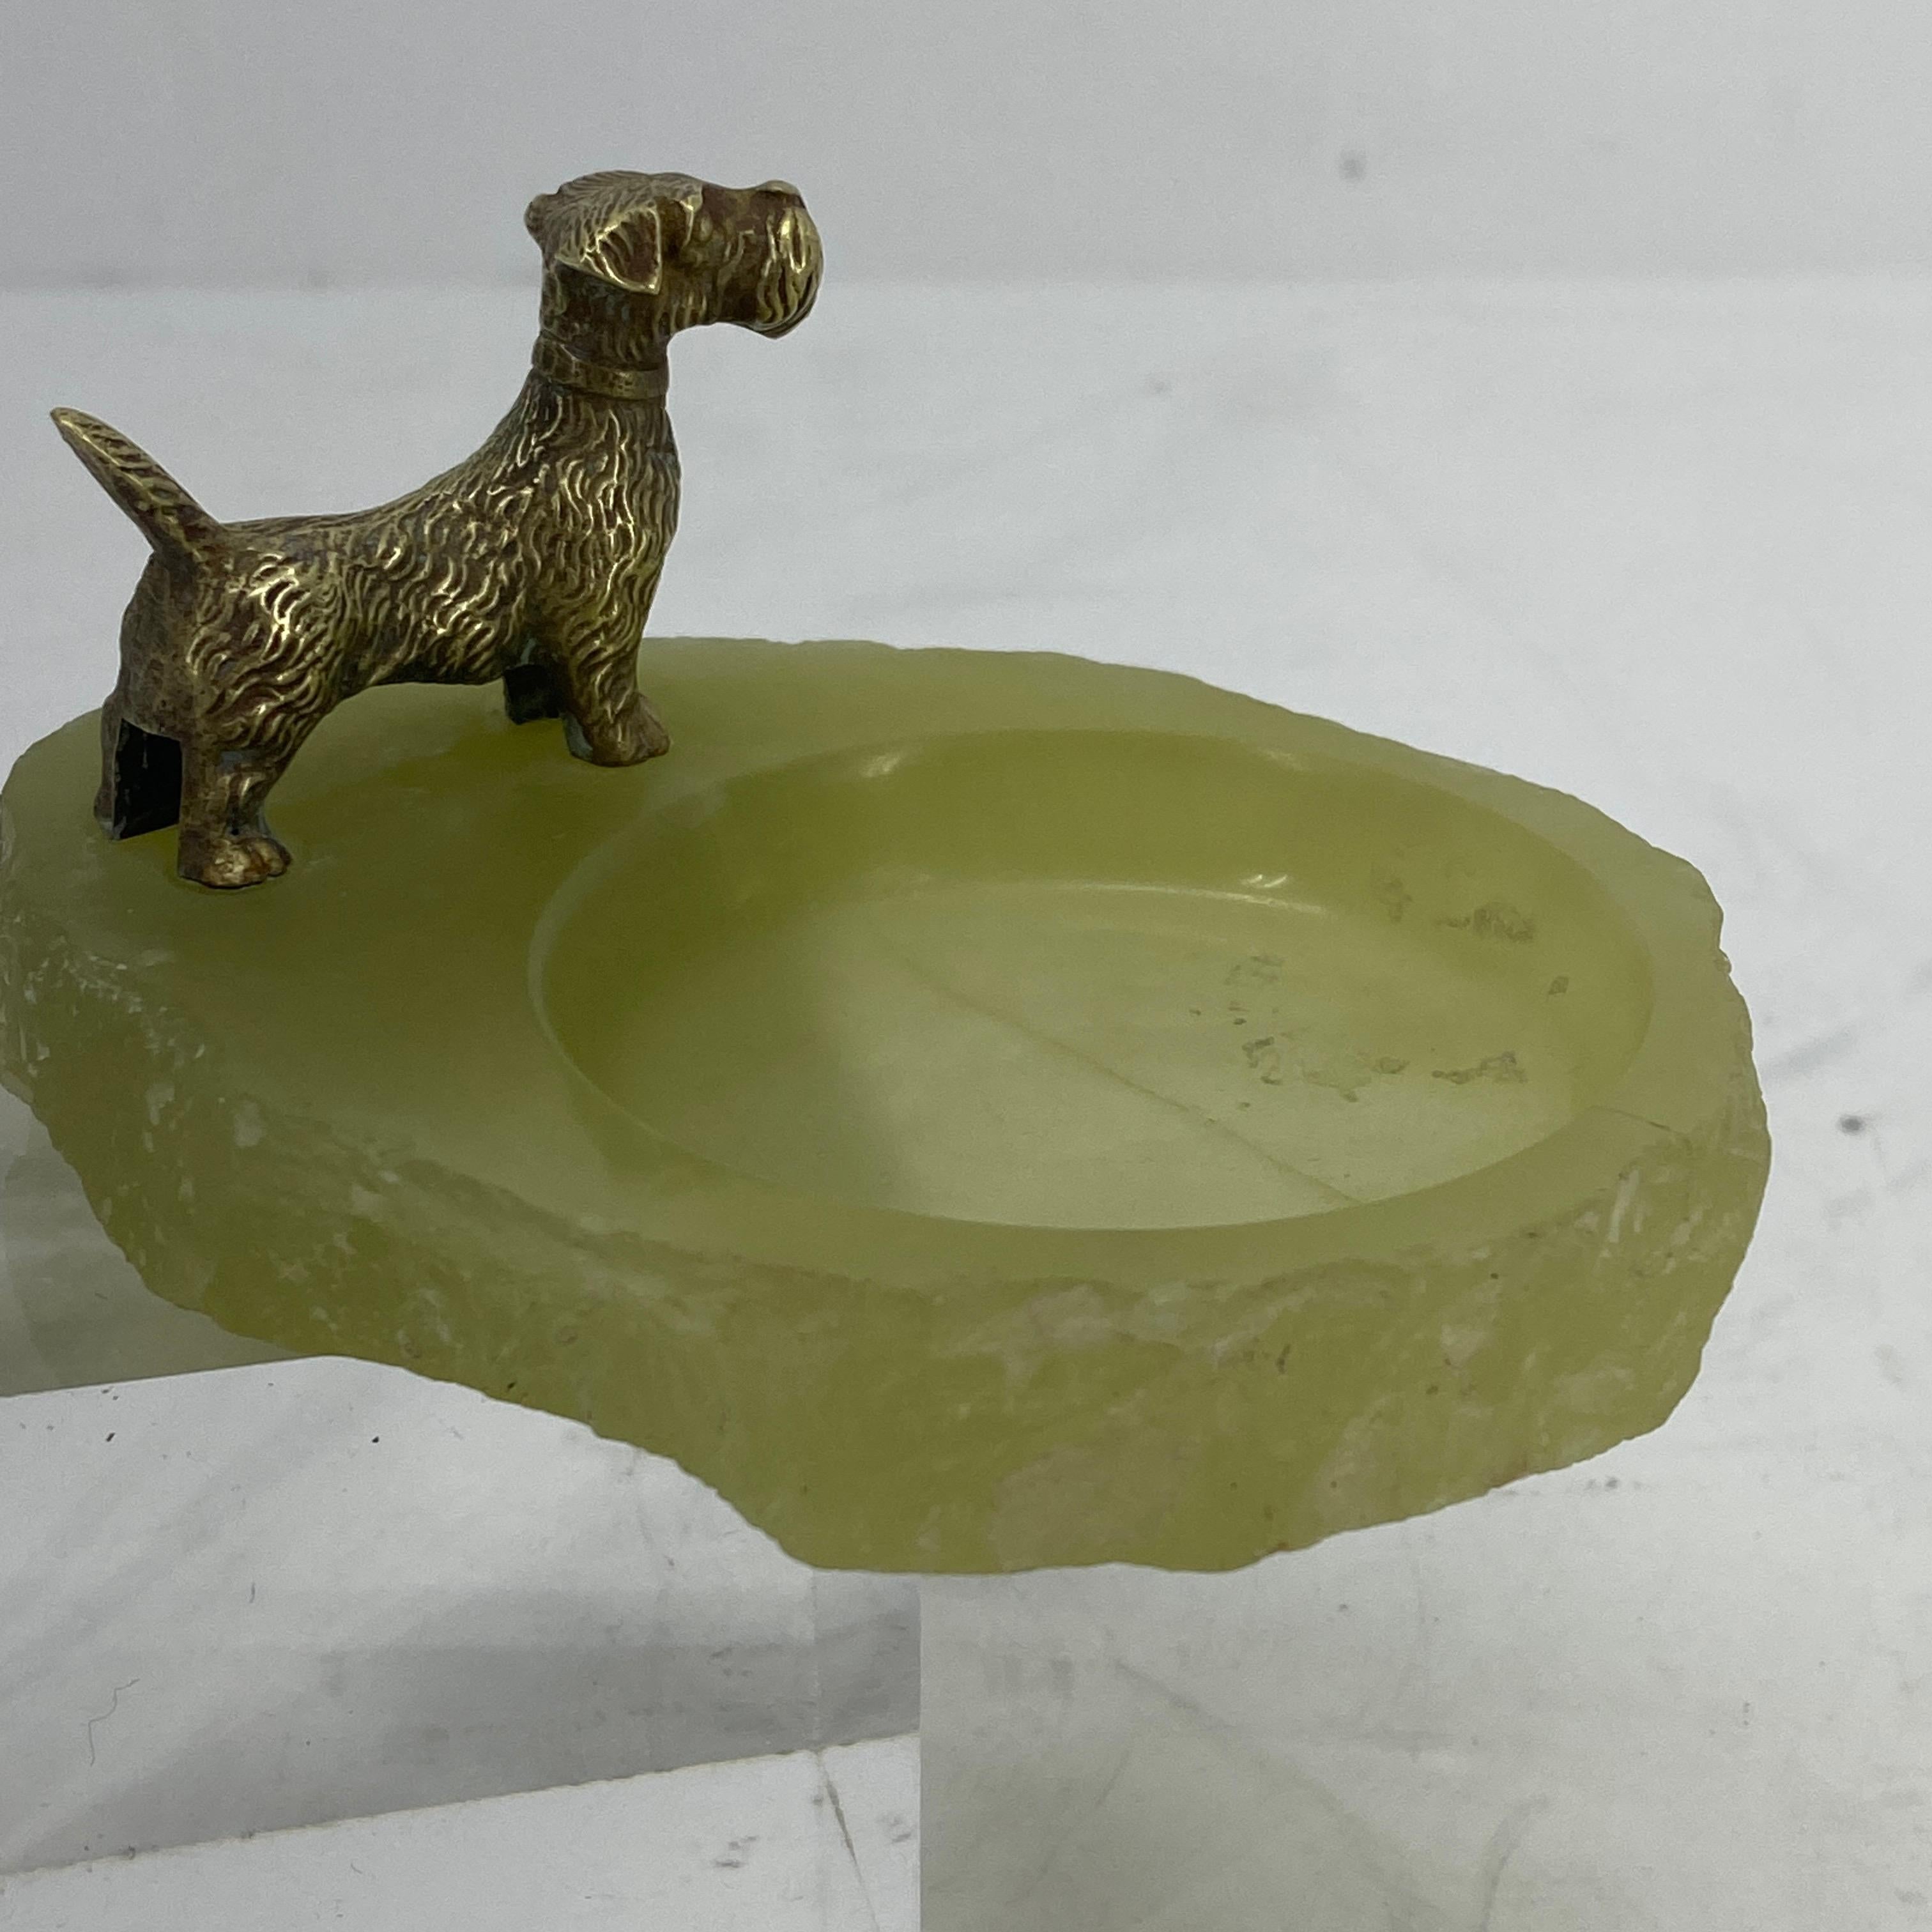 Pistachio Green Onyx and Bronze Terrier Ashtray or Jewelry Tray 6